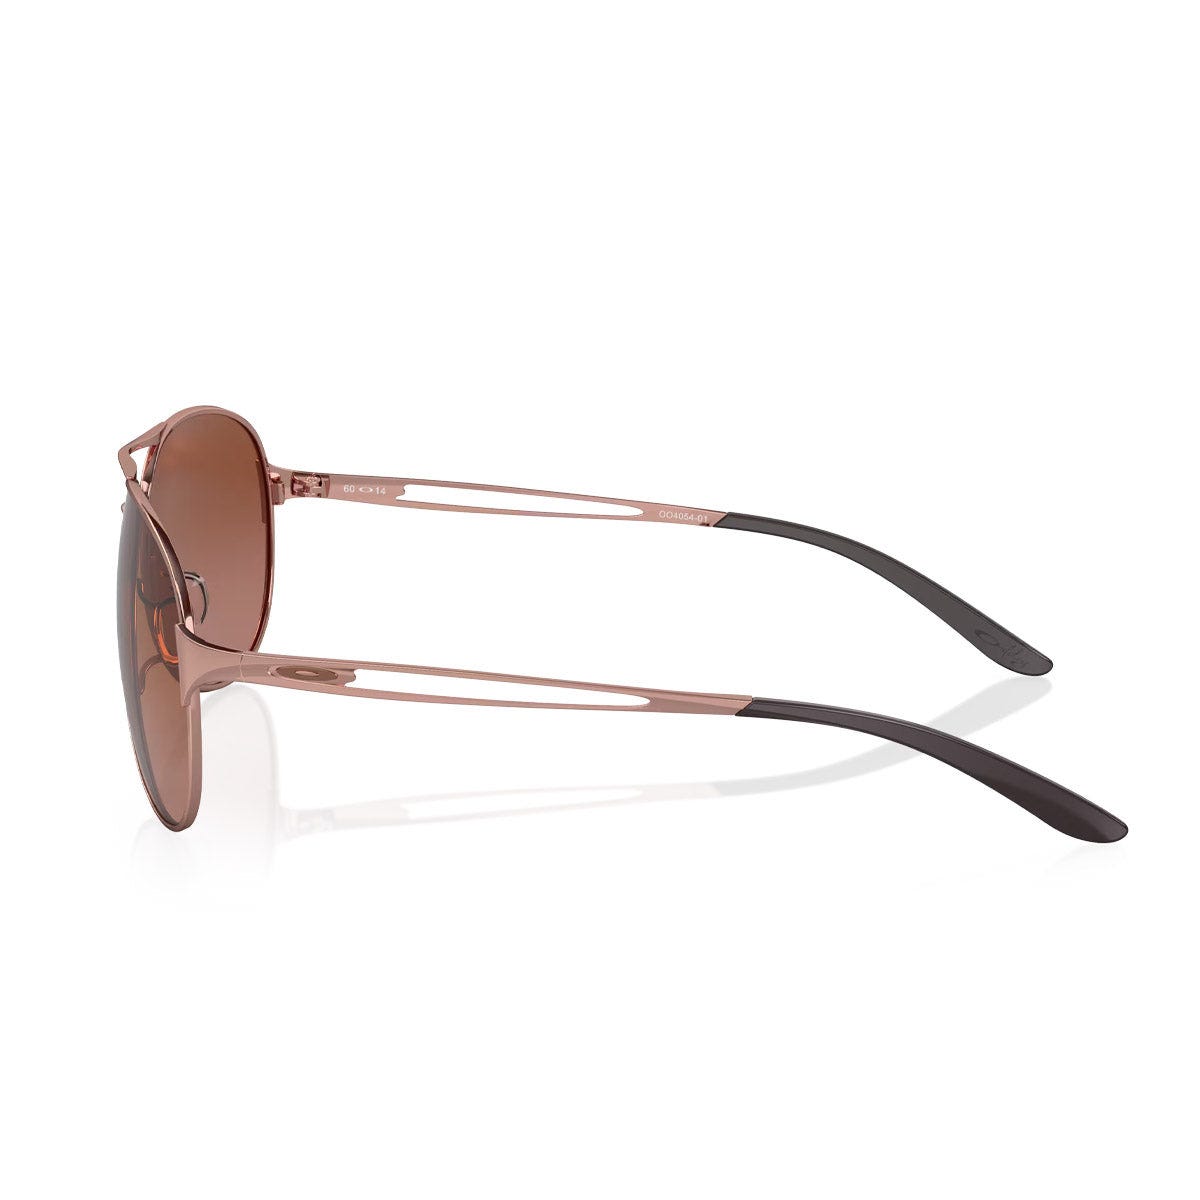 Rose gold aviator sunglasses with slim double-bridge frames and dark lenses; black, curved earpieces for a comfortable fit.